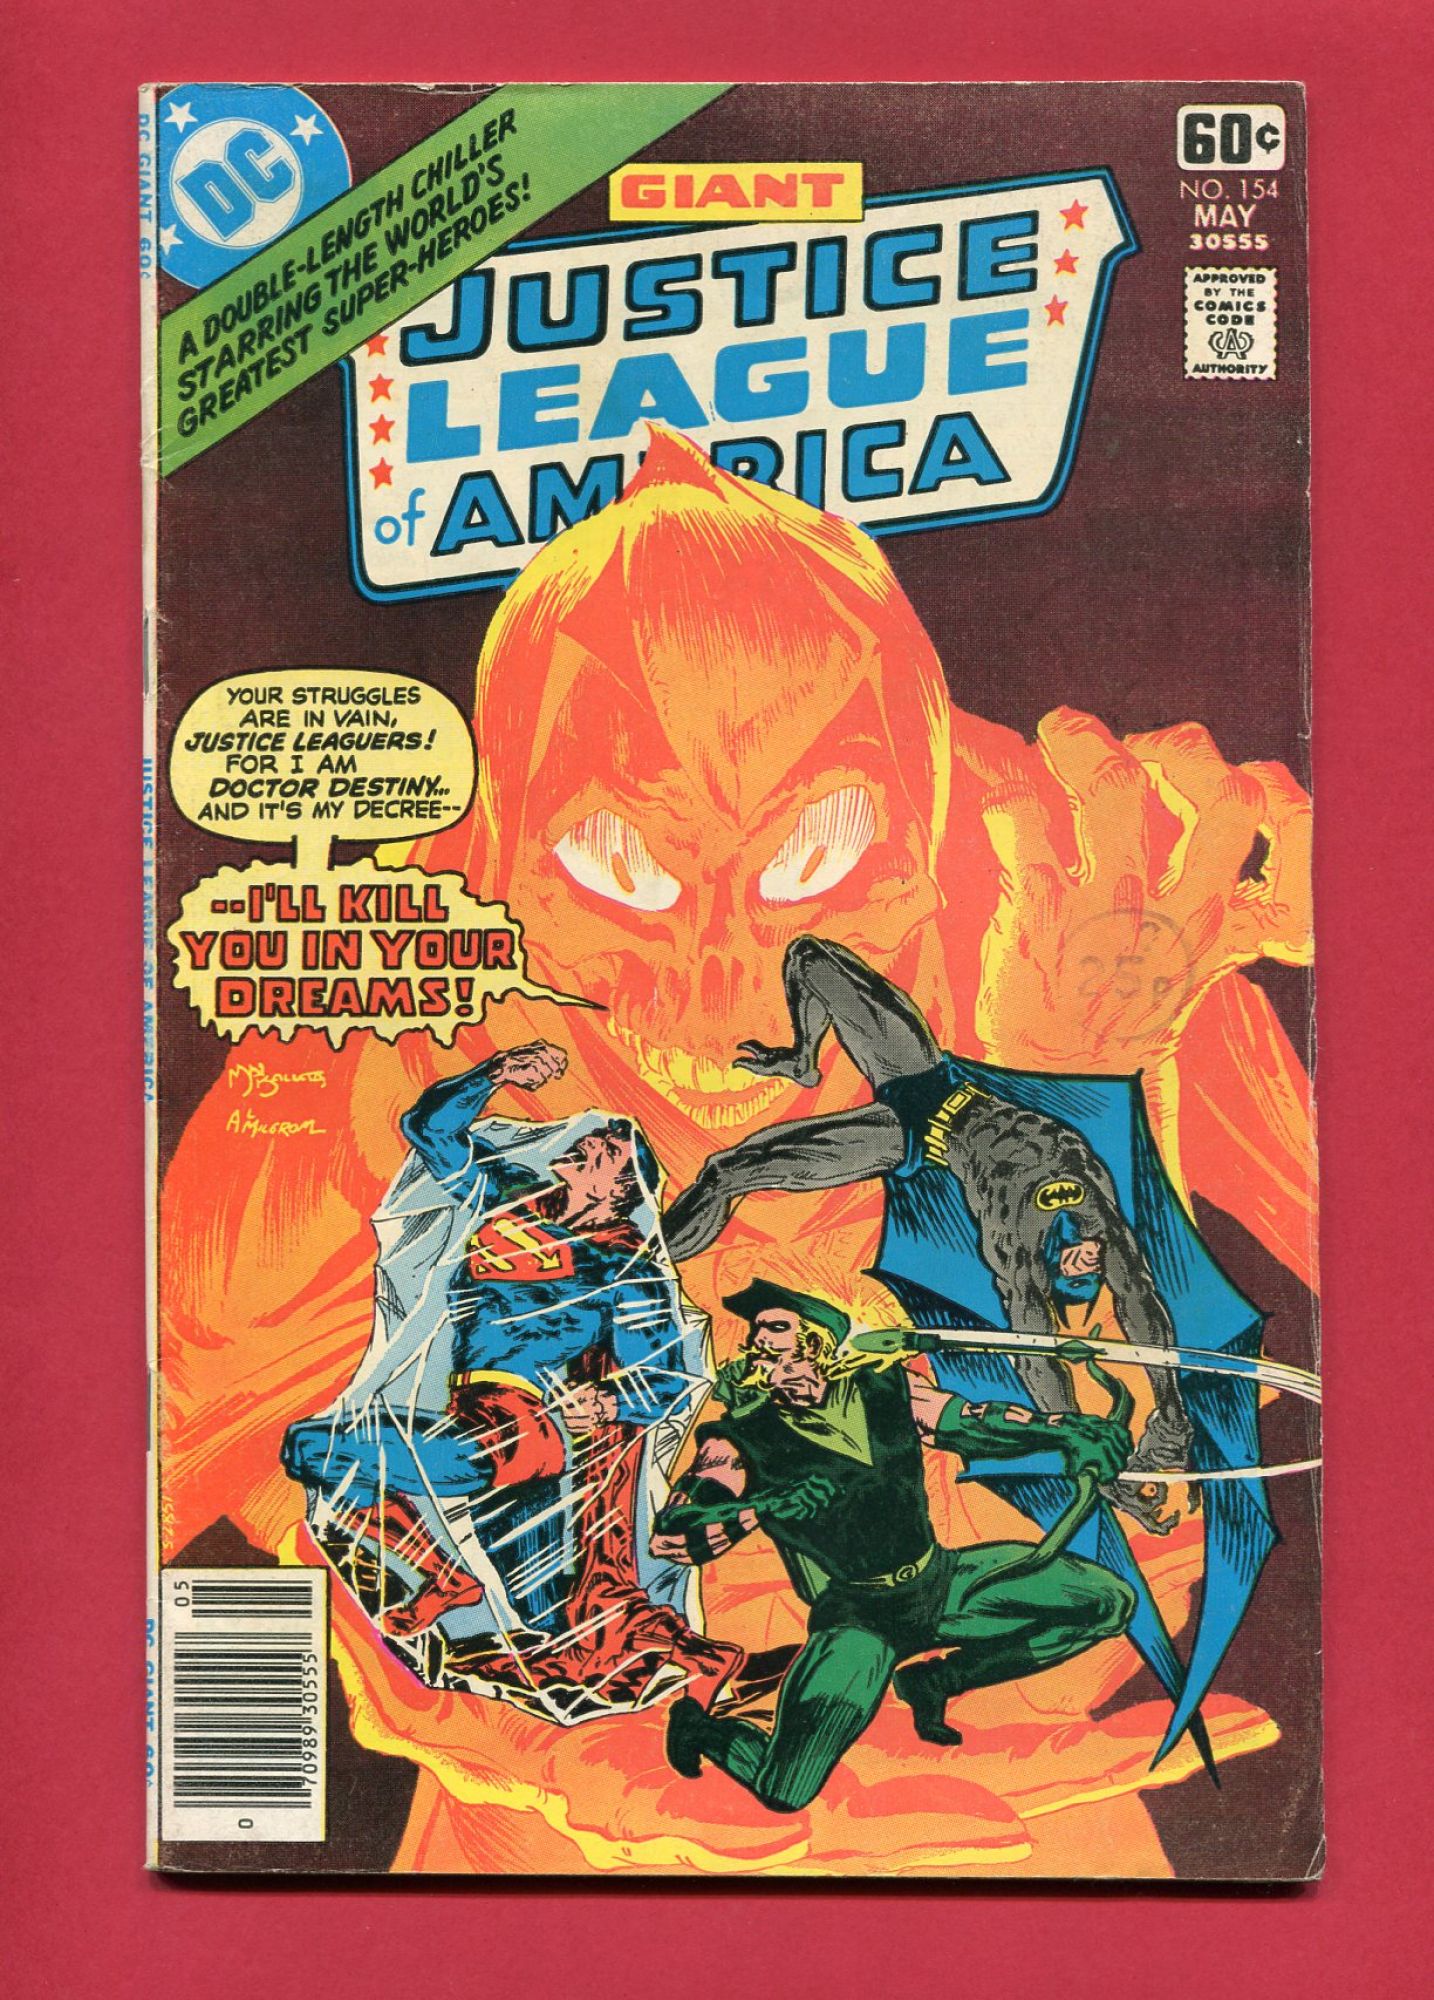 Justice League of America #154, May 1978, 5.5 FN-